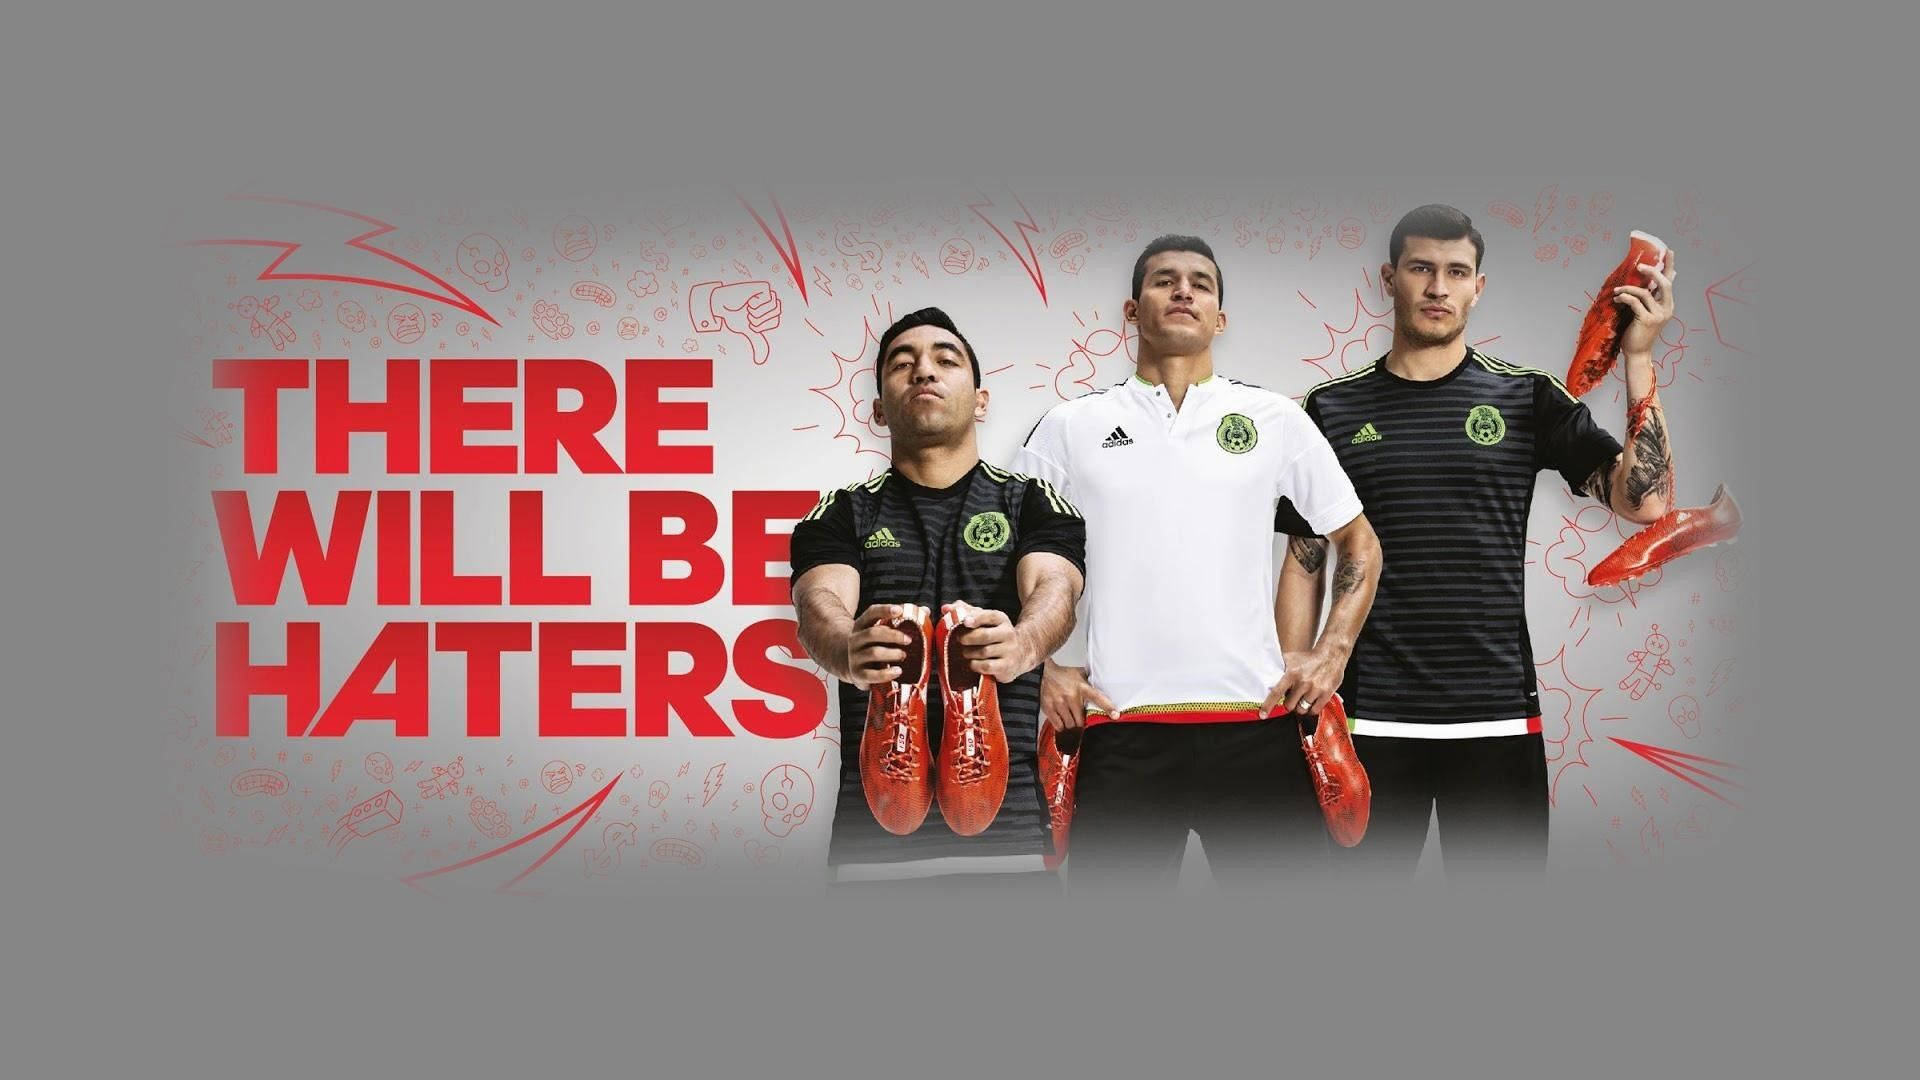 Cool Soccer Twbh Campaign